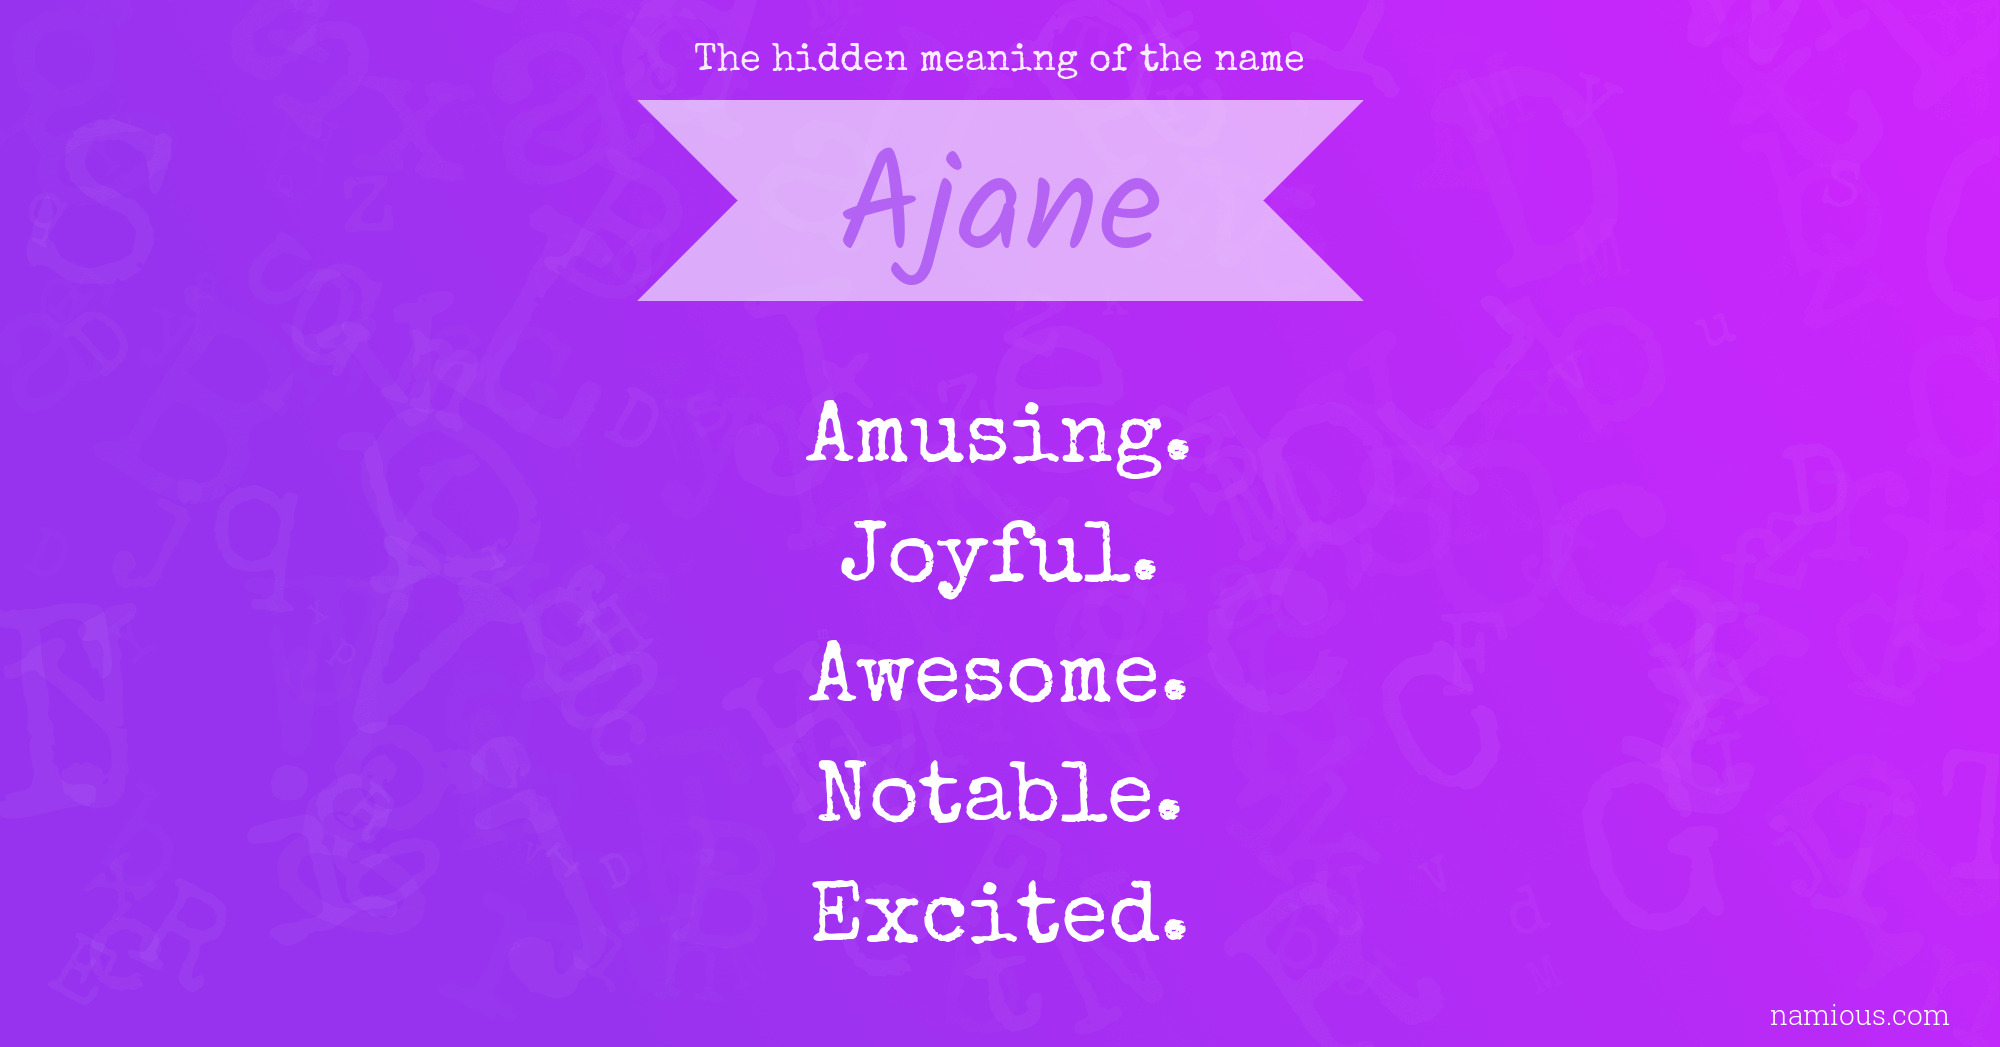 The hidden meaning of the name Ajane